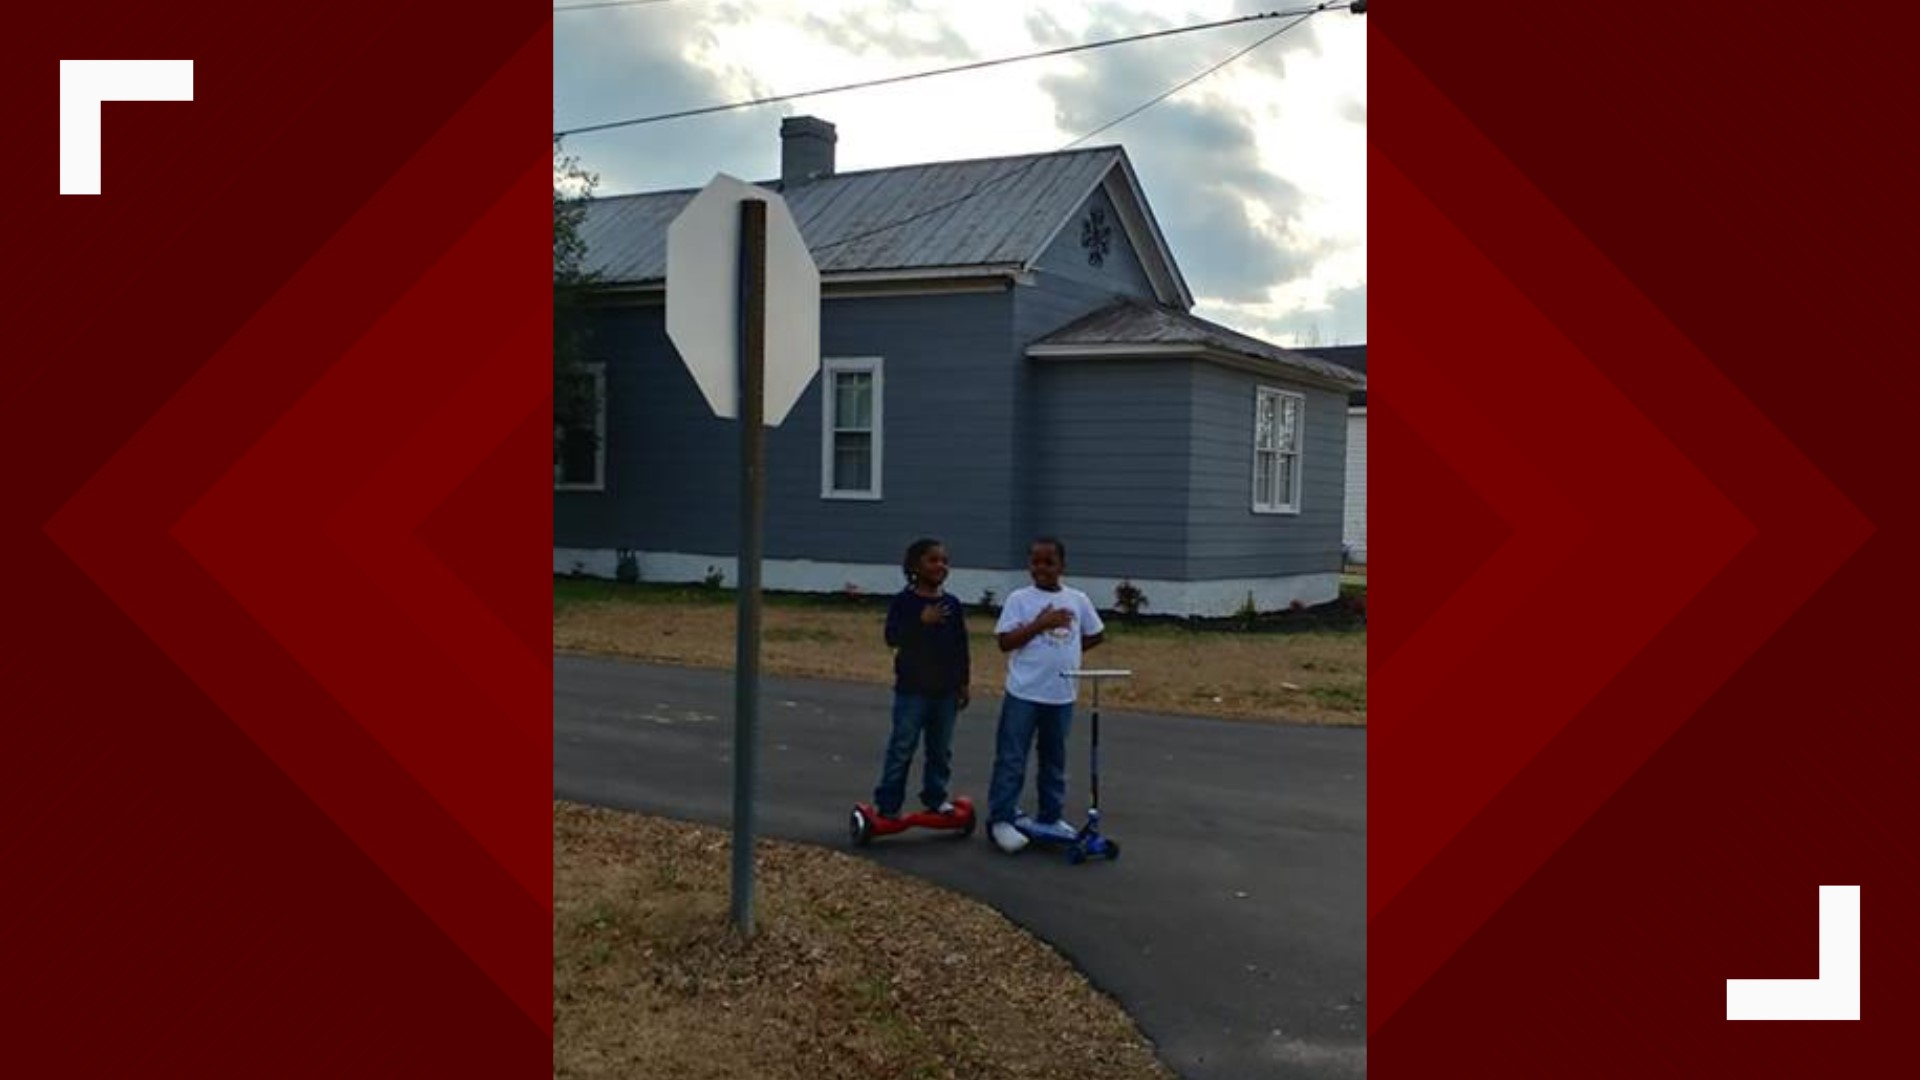 A photo of two young boys who stopped to recite the Pledge of Allegiance in front of a North Carolina firehouse has gone viral. Over the weekend, Roseboro Fire Department posted an image of the boys with their hands over their hearts as the flag was raised